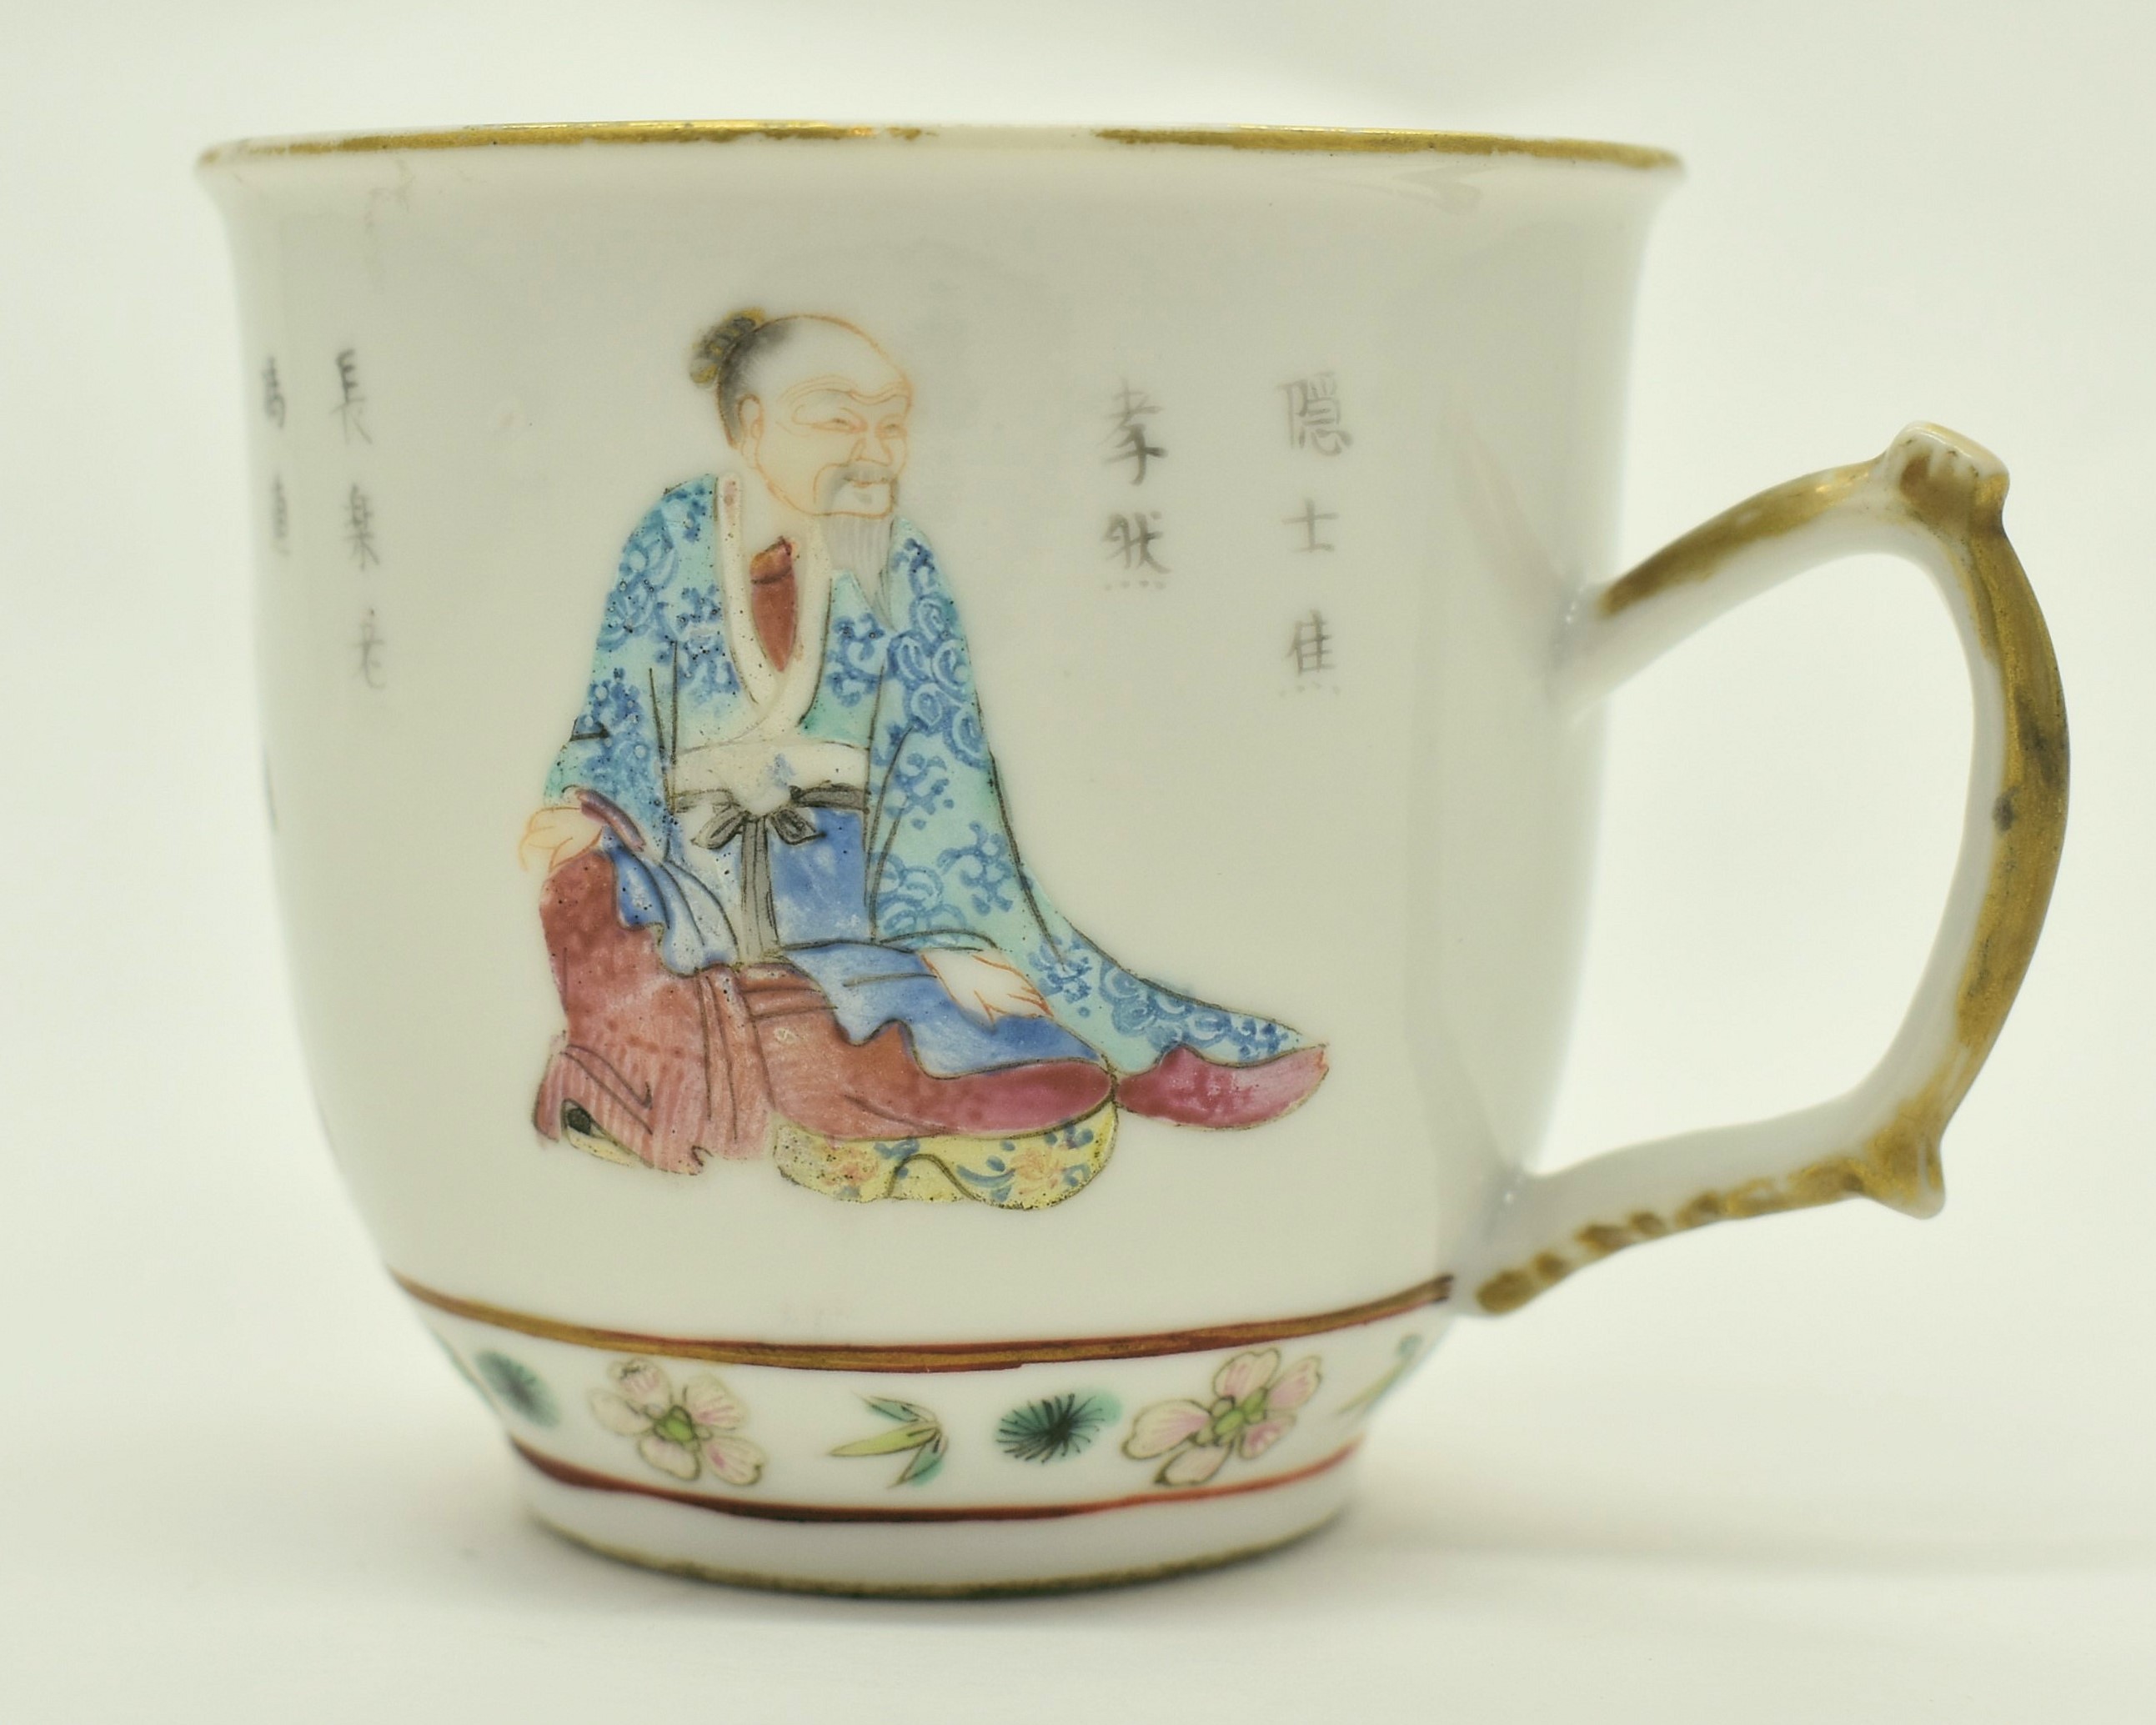 FAMILLE ROSE WU SHUANG PU CUP WITH HANDLE 道光粉彩无双谱人物杯